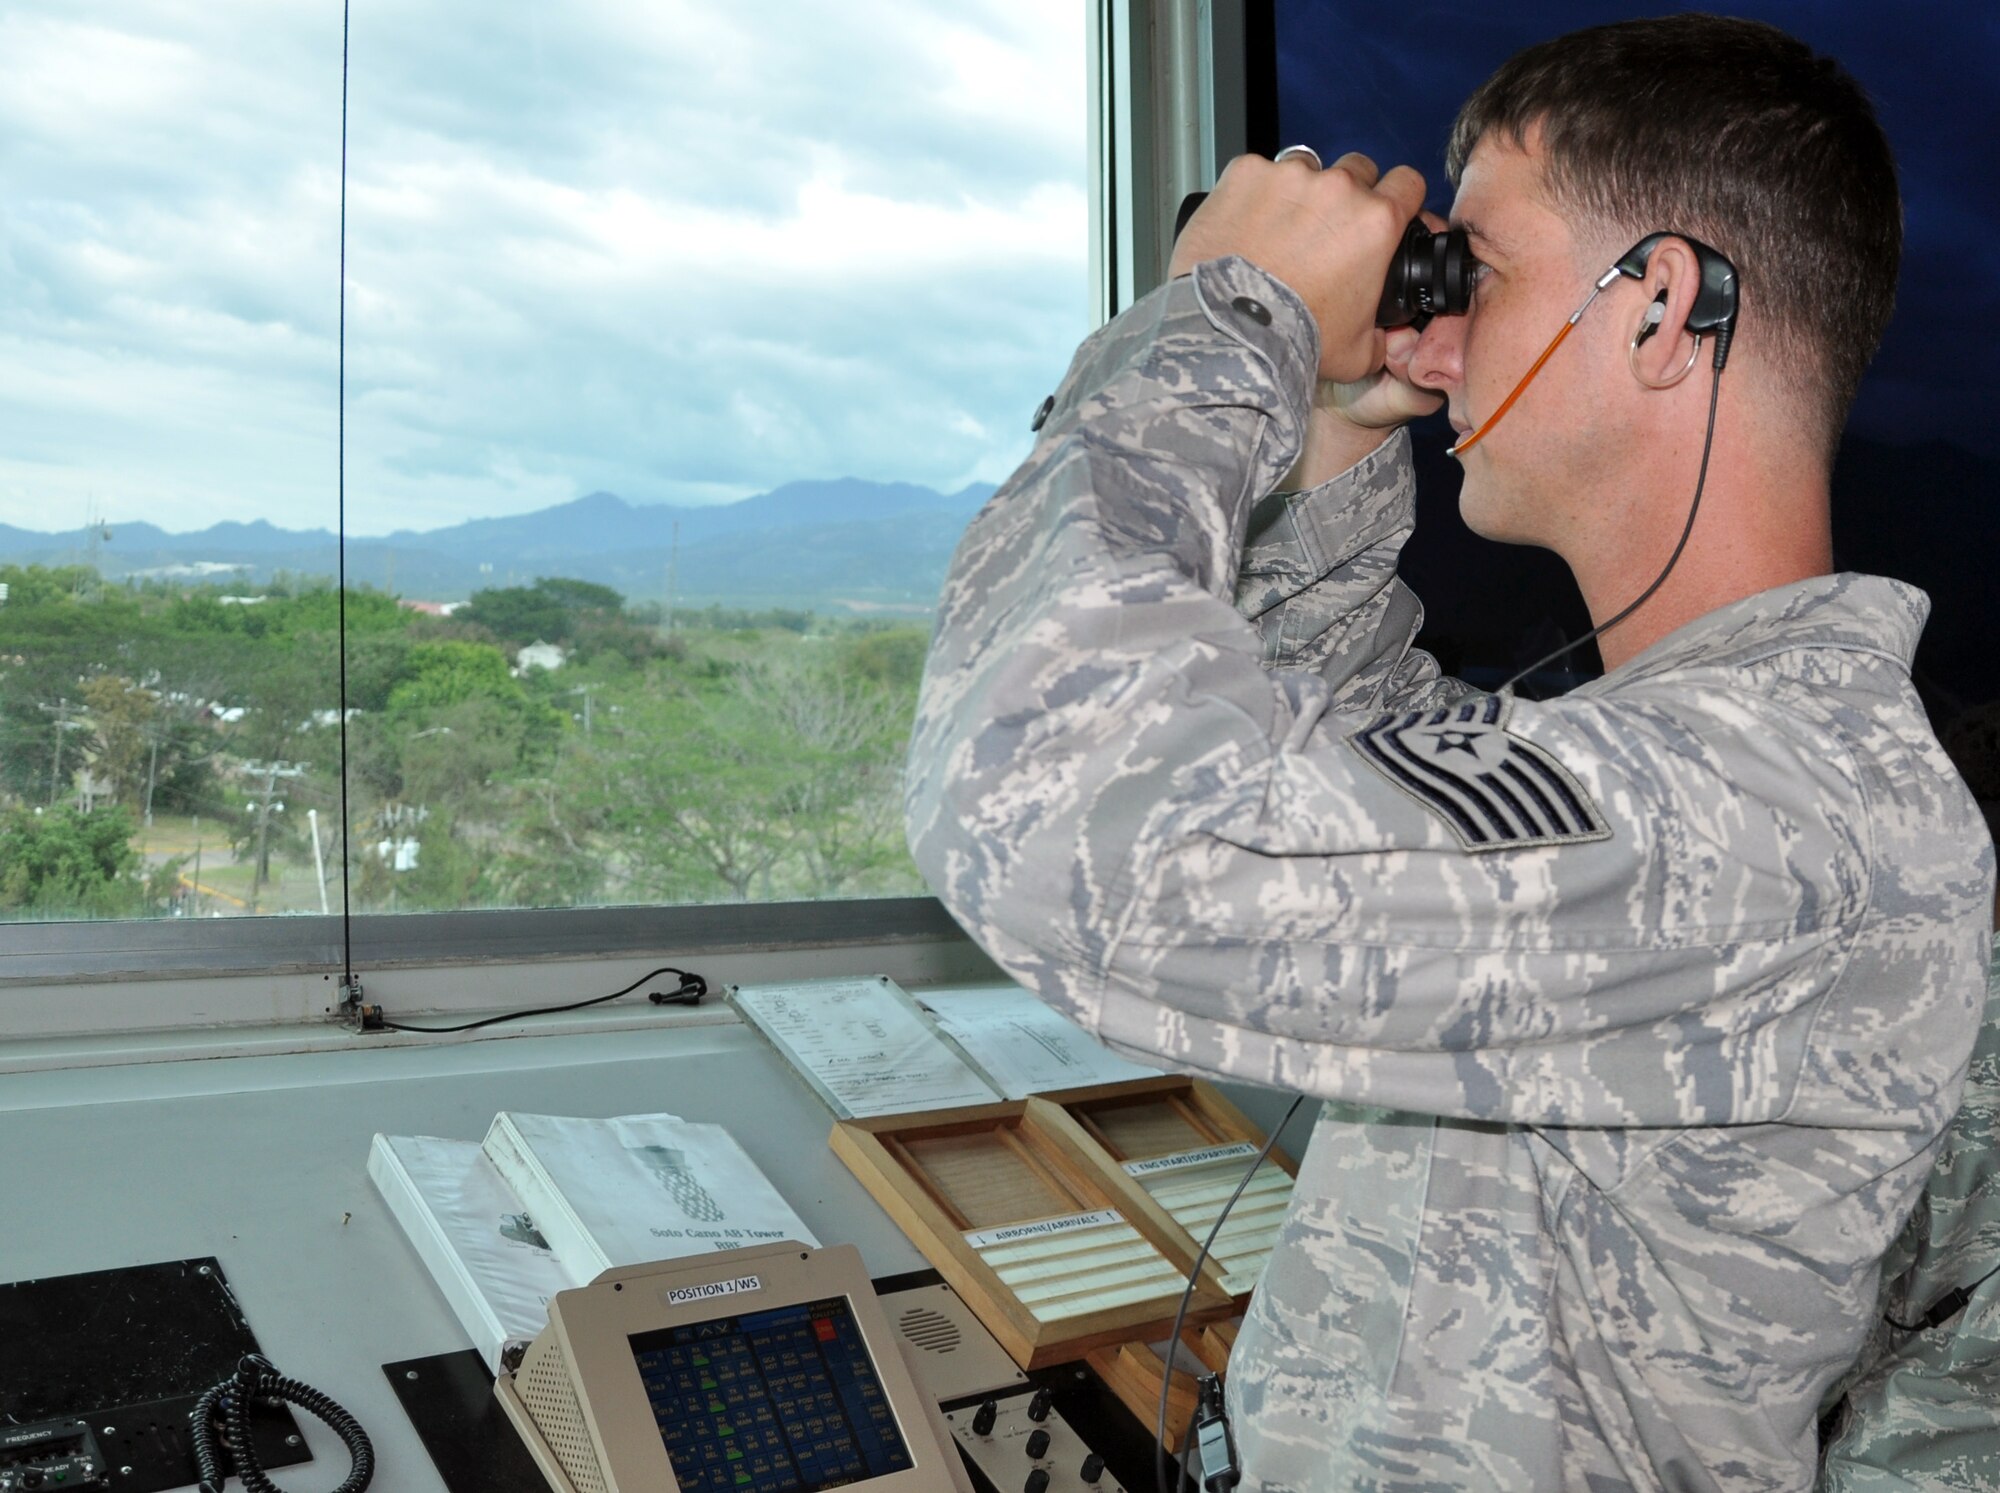 U.S. Air Force Tech. Sgt. Charles Simper, an Air Traffic Control Watch Supervisor assigned to the 612th Air Base Squadron, Joint Task Force Bravo, directs air traffic from the control tower at Soto Cano Air Base, Honduras, Dec. 19, 2013. Air traffic controllers in the tower are responsible for directing air traffic departing and arriving at Soto Cano, as well as vehicle traffic that occurs on the controlled movement area (CMA), which includes the area of the landing zones and runways. (U.S. Air Force photo by Capt. Zach Anderson)